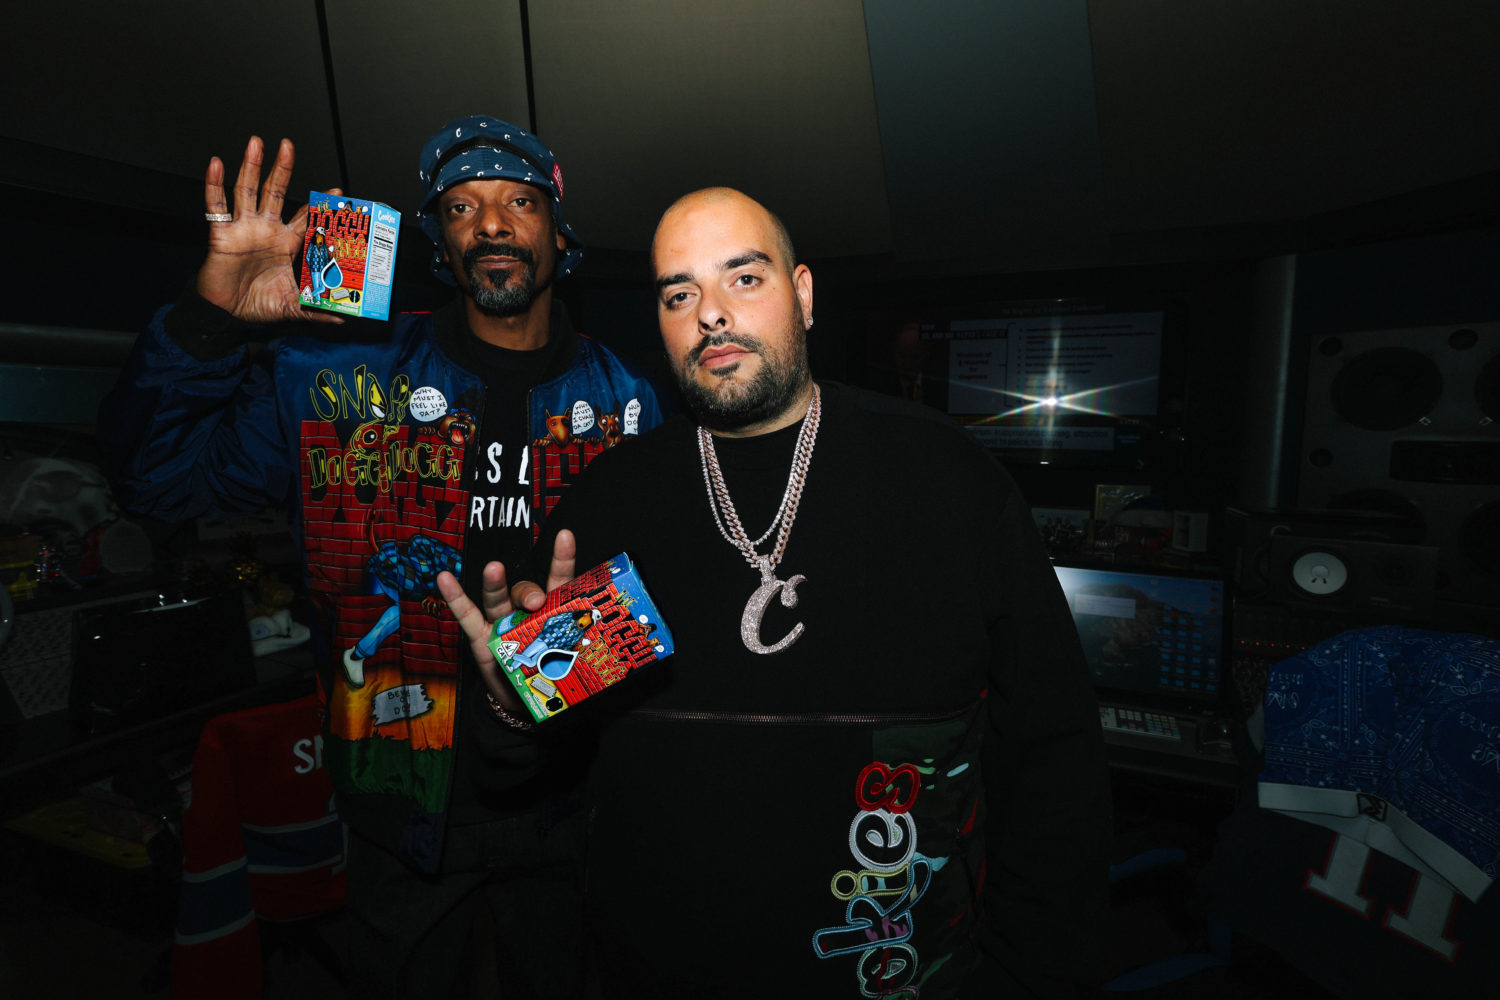 The Snoop Dogg x Berner 4/20 “Doggy Bag” Drop Went OFF at Cookies Maywood